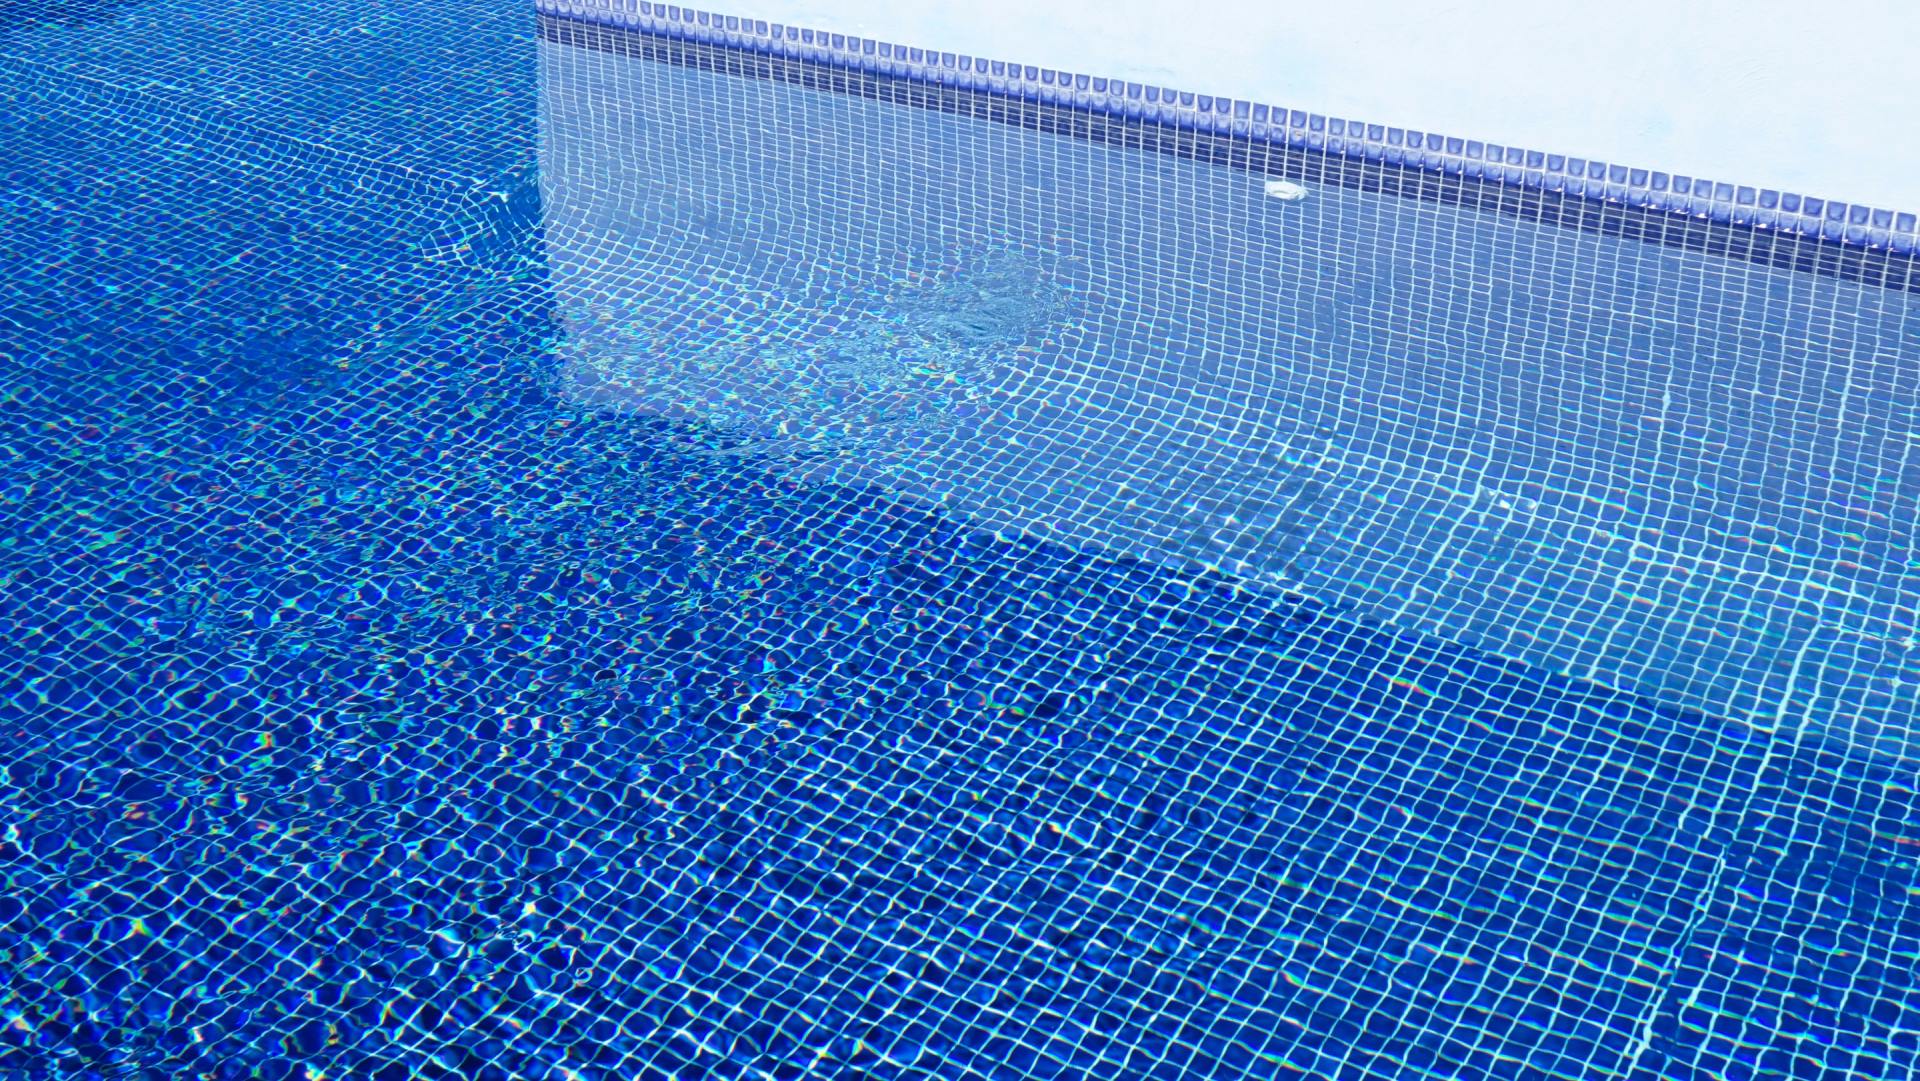 How to Remove Calcium From Pool Tile: A Guide for Pool Owners